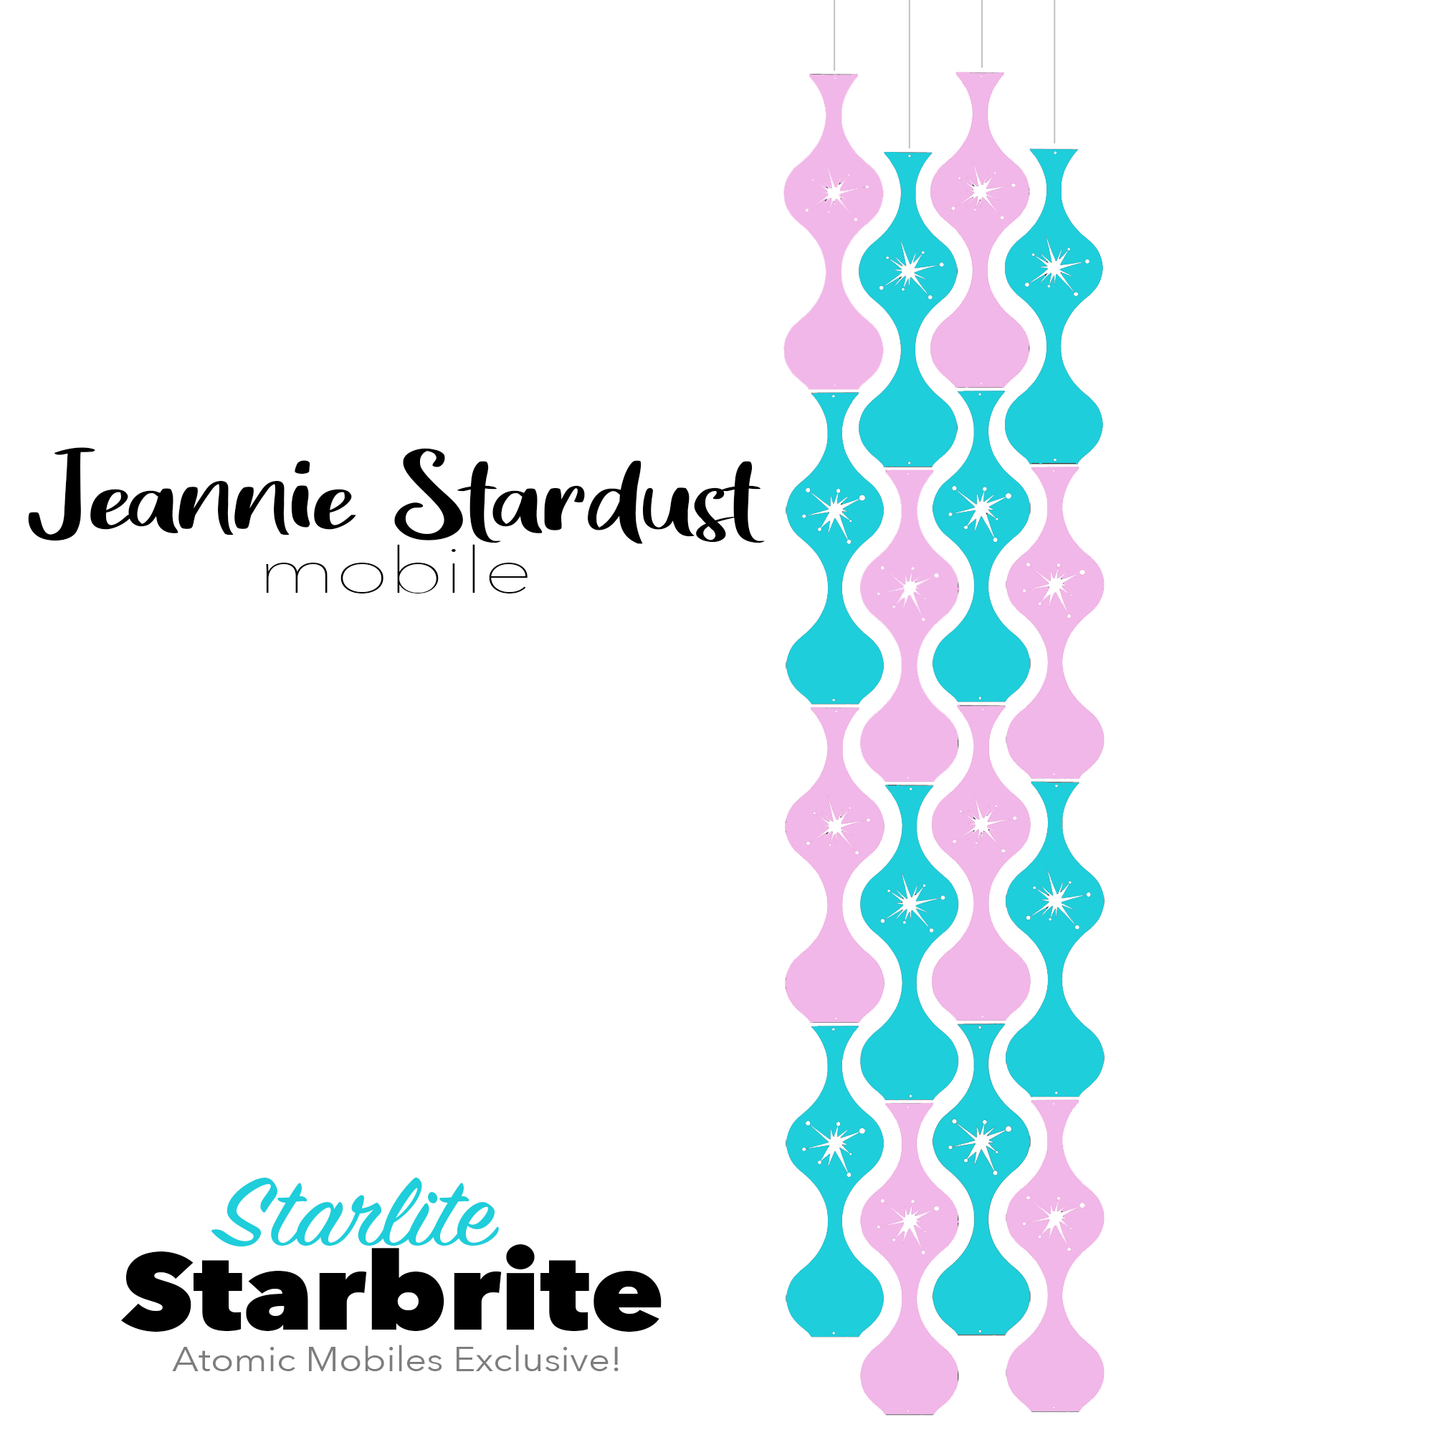 Starlite Starbrite Jeannie Stardust Hanging Art Mobile - mid century modern home decor in Aqua and Pink - by AtomicMobiles.com